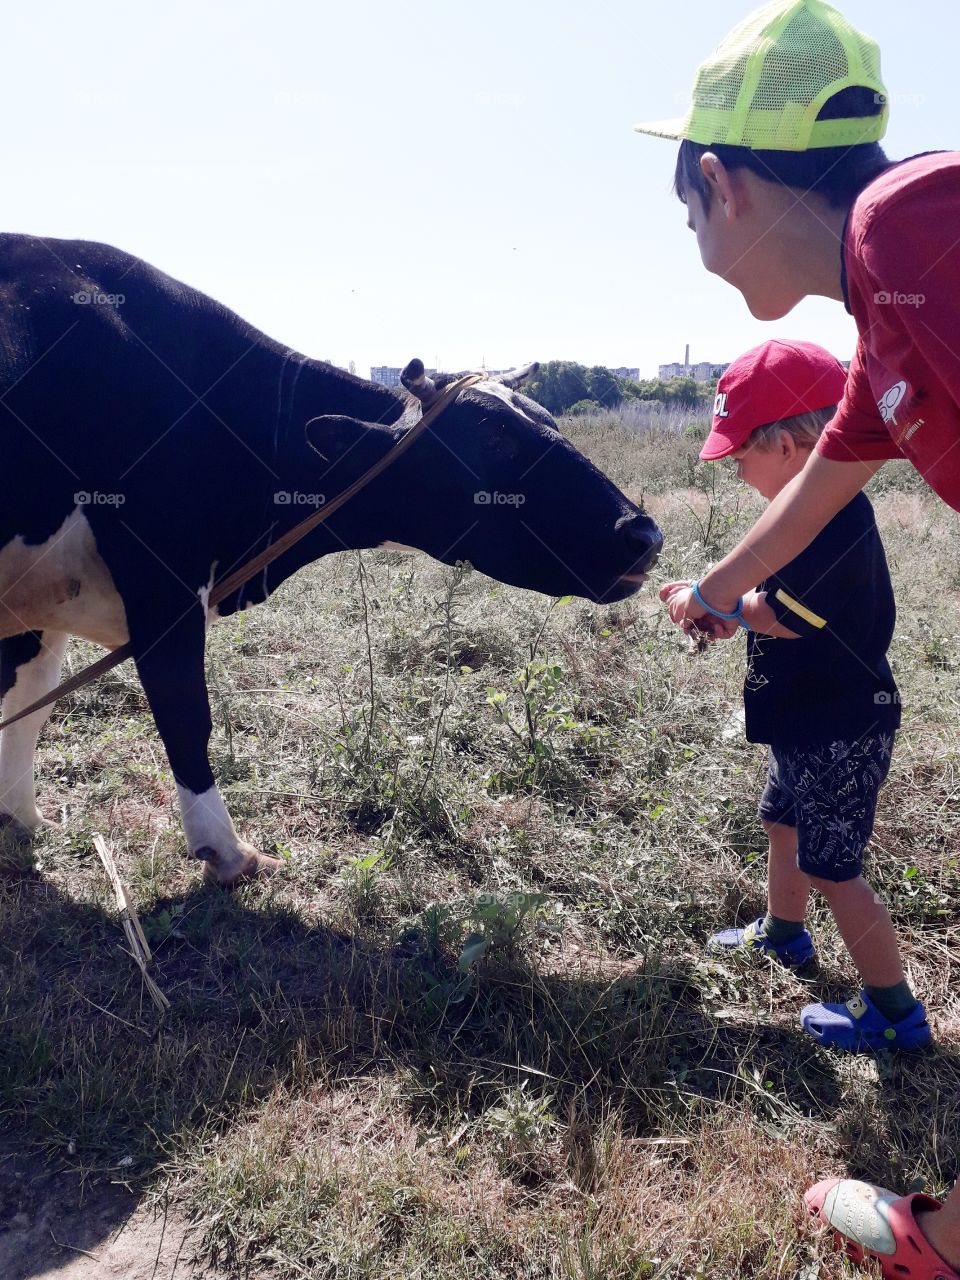 two kids feed the cow